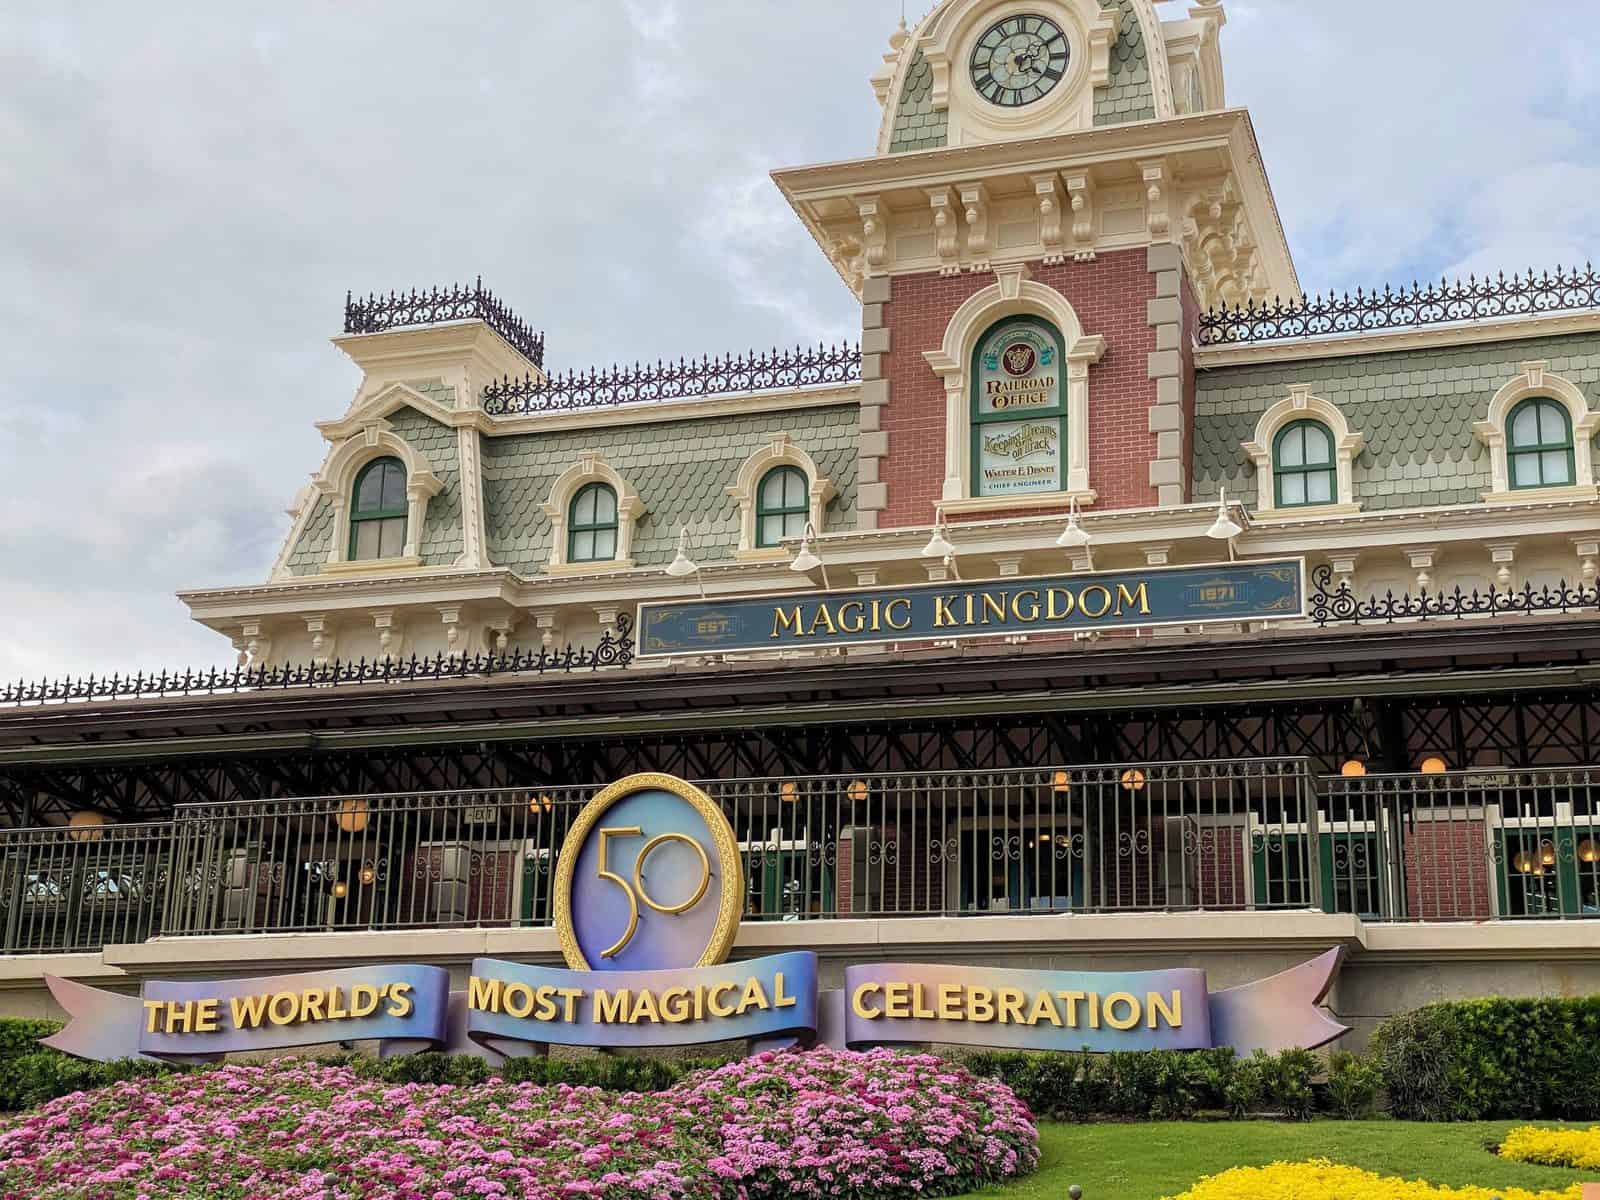 Complete Guide to the 50th Anniversary Celebration at Disney World (ended March 31, 2023)